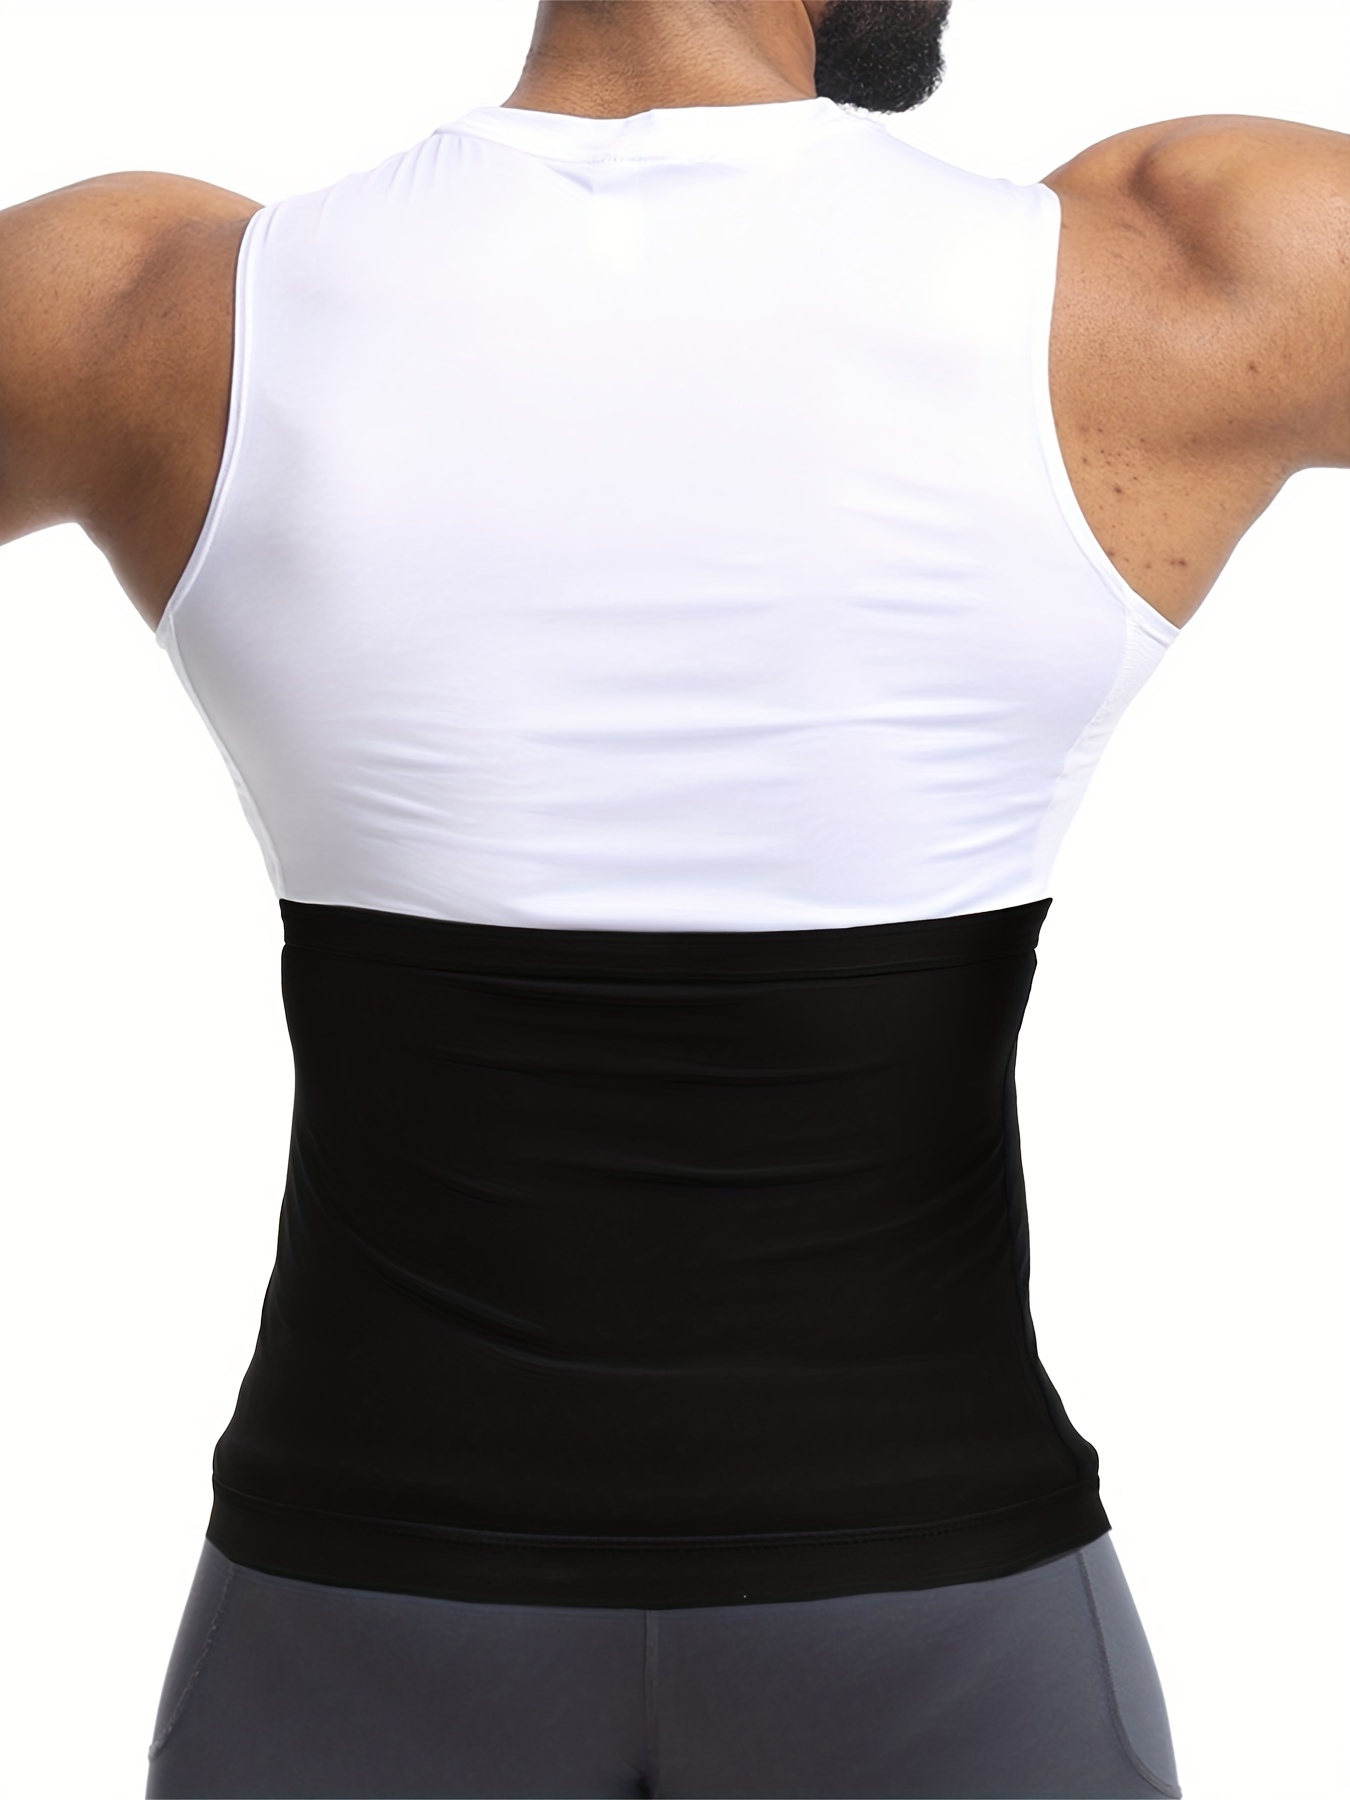 MenS Sweat Shaper Vest for Weight Loss Sauna Slimming Workout